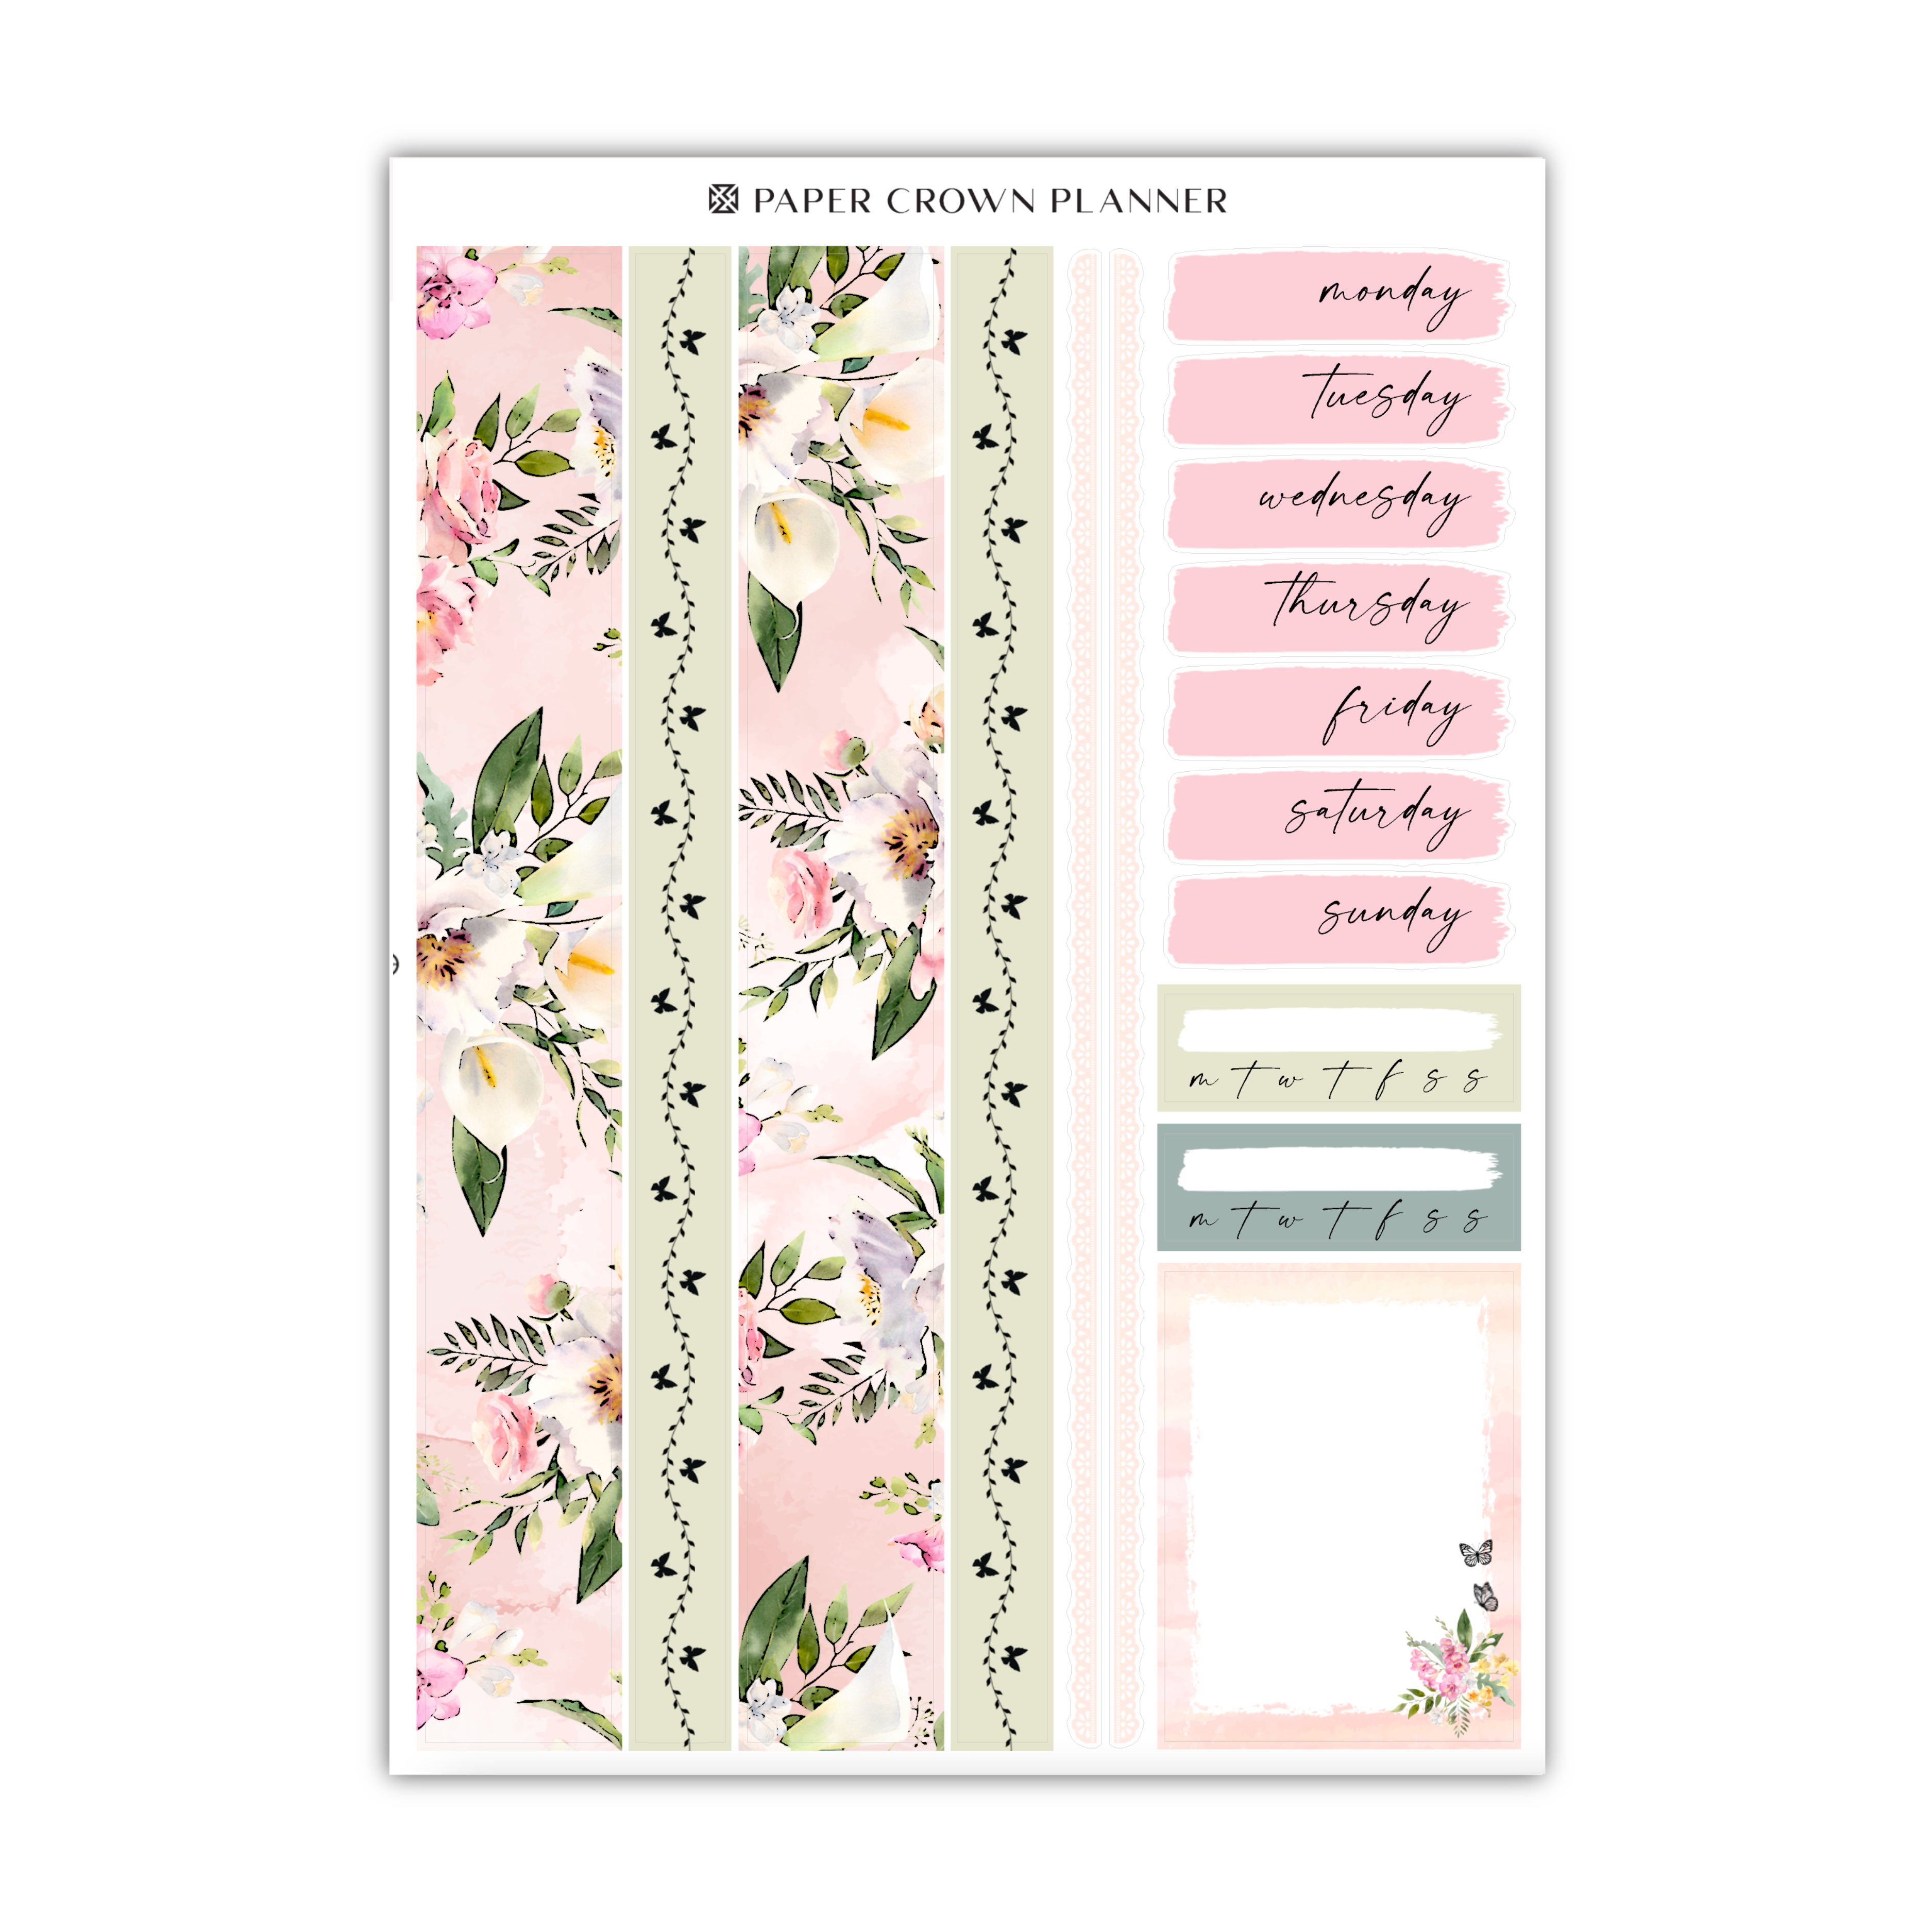 a pink planner sticker with flowers and leaves